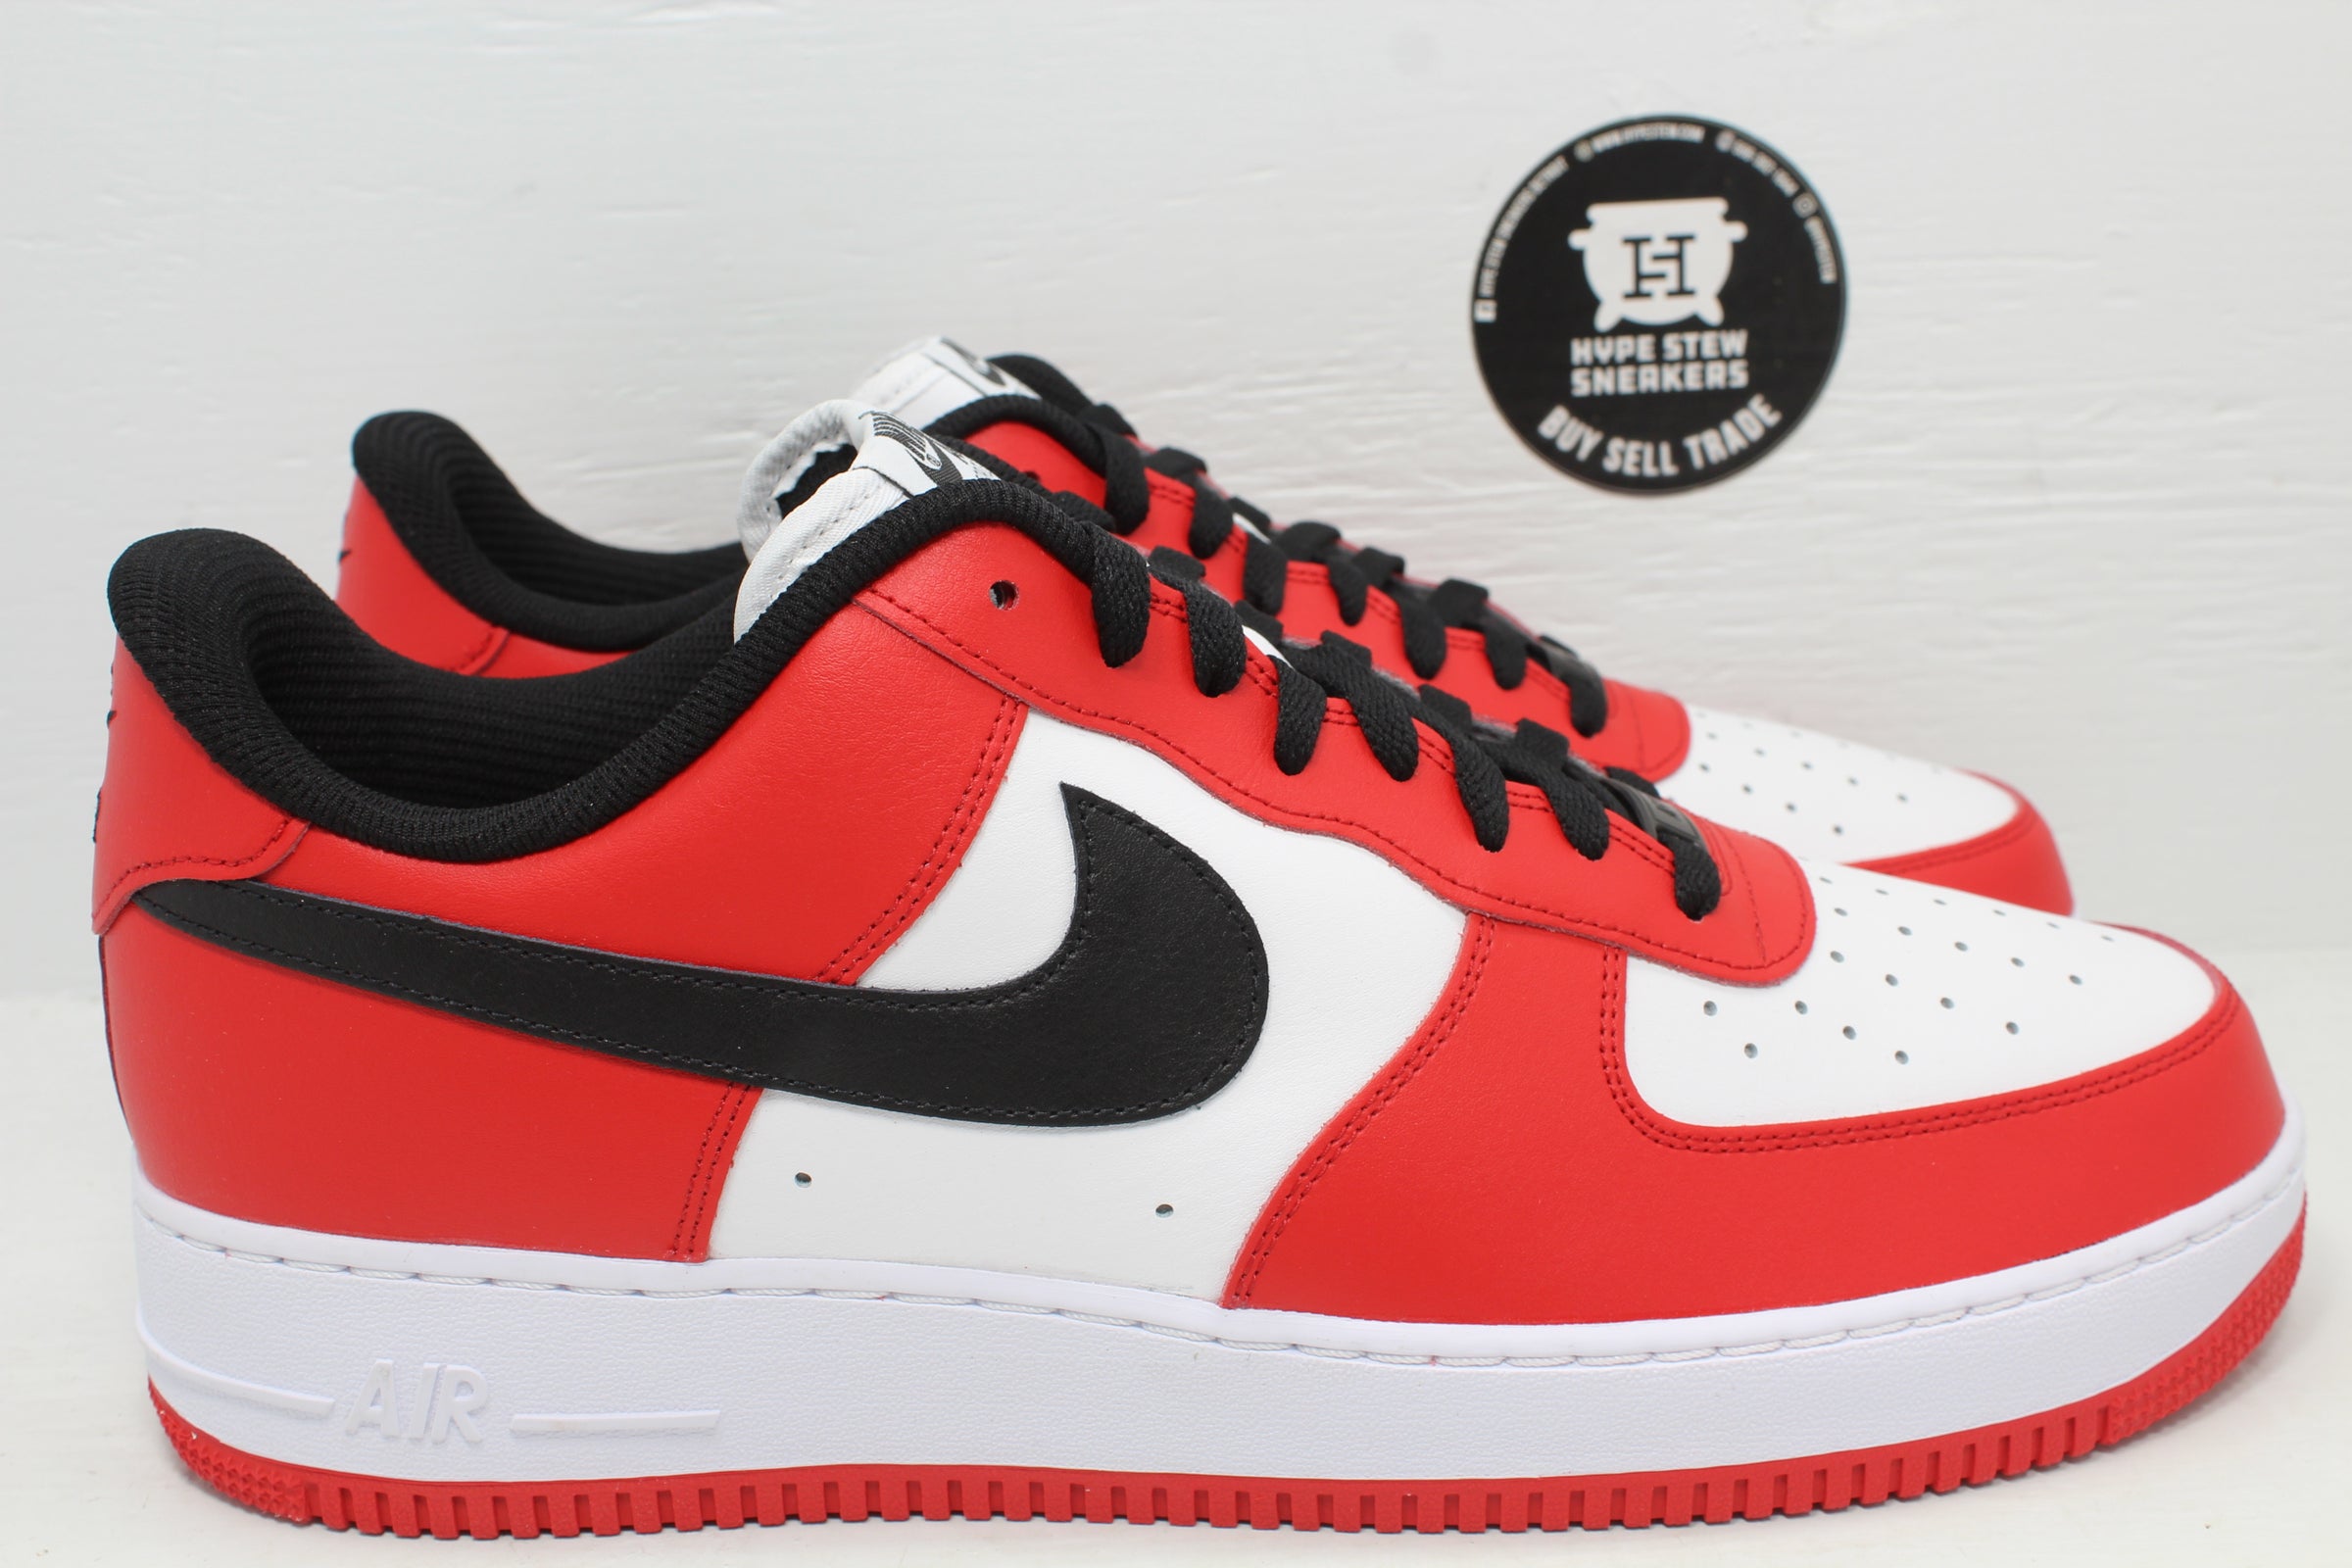 Nike Air Force 1 You Custom Chicago | Hype Stew Sneakers Detroit